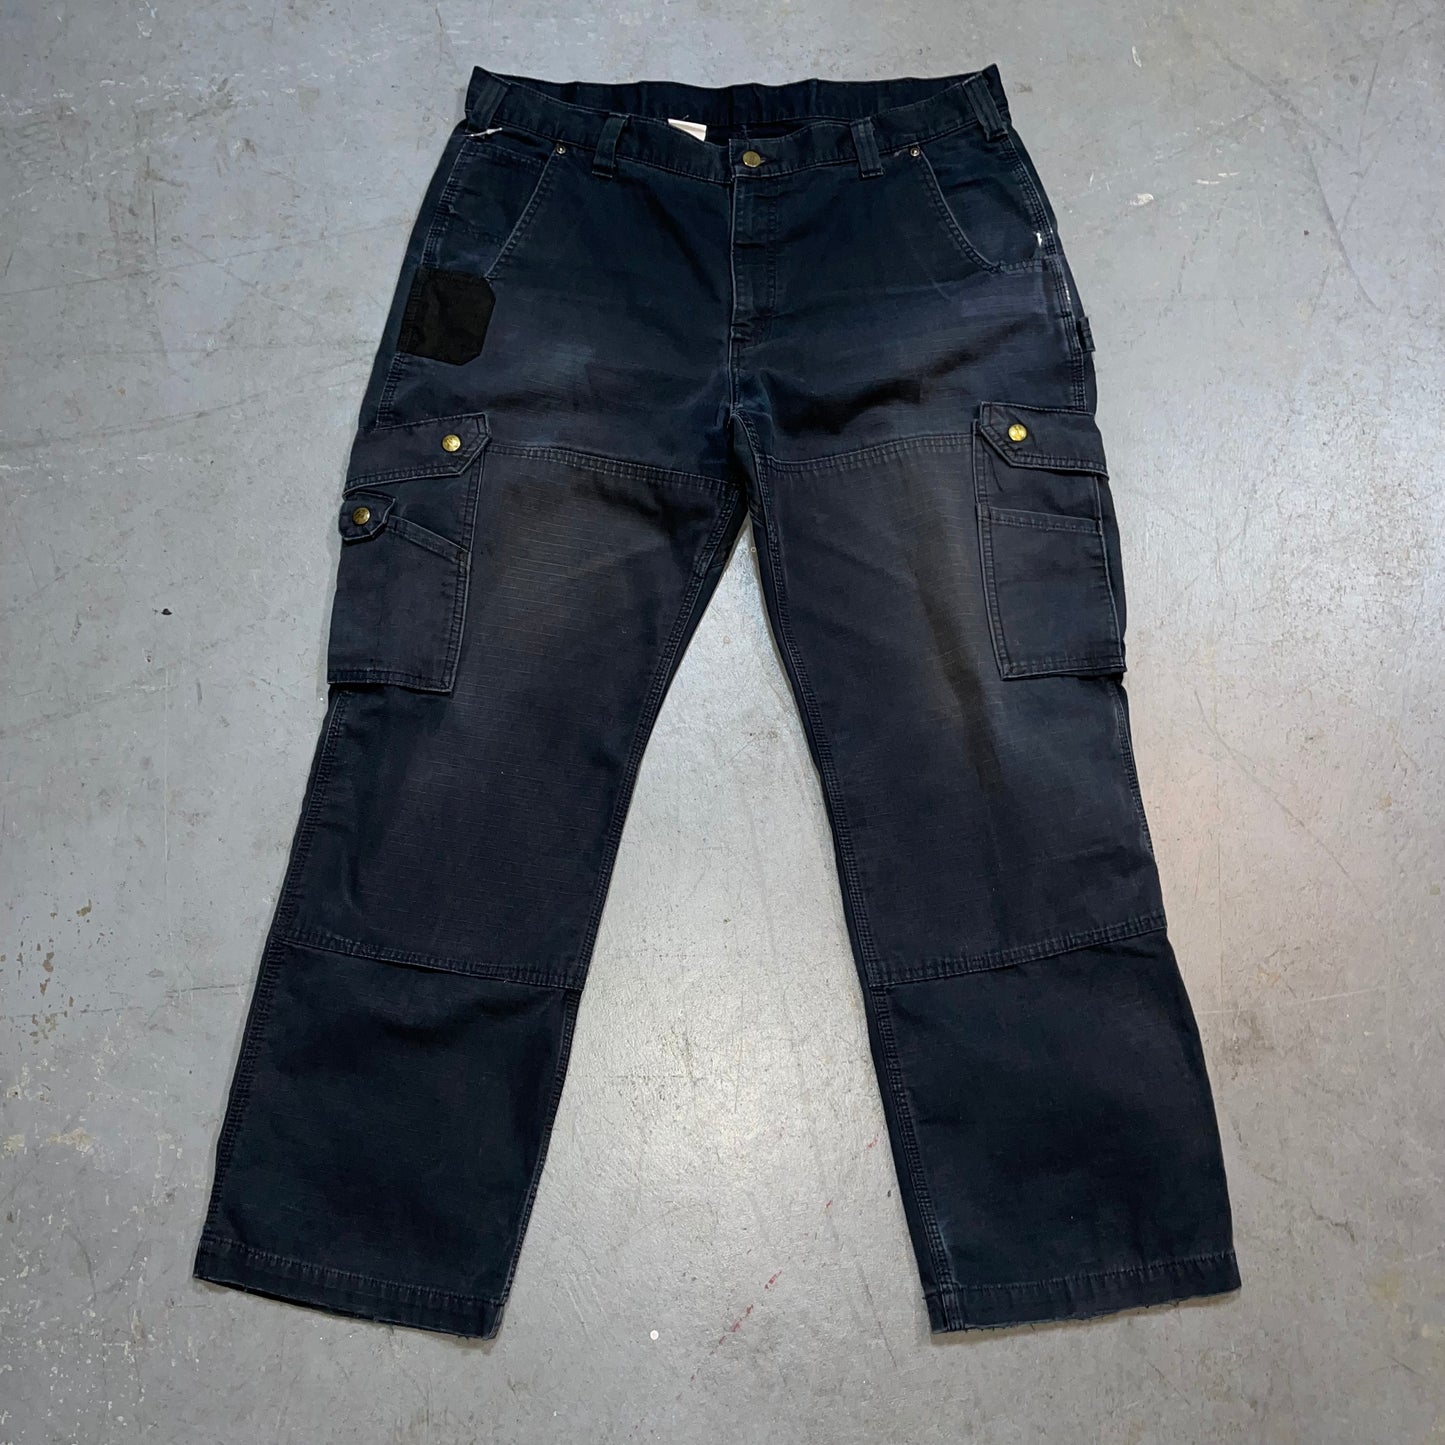 Y2K Carhartt Relaxed Fit Cargo Pants. Size 38x30